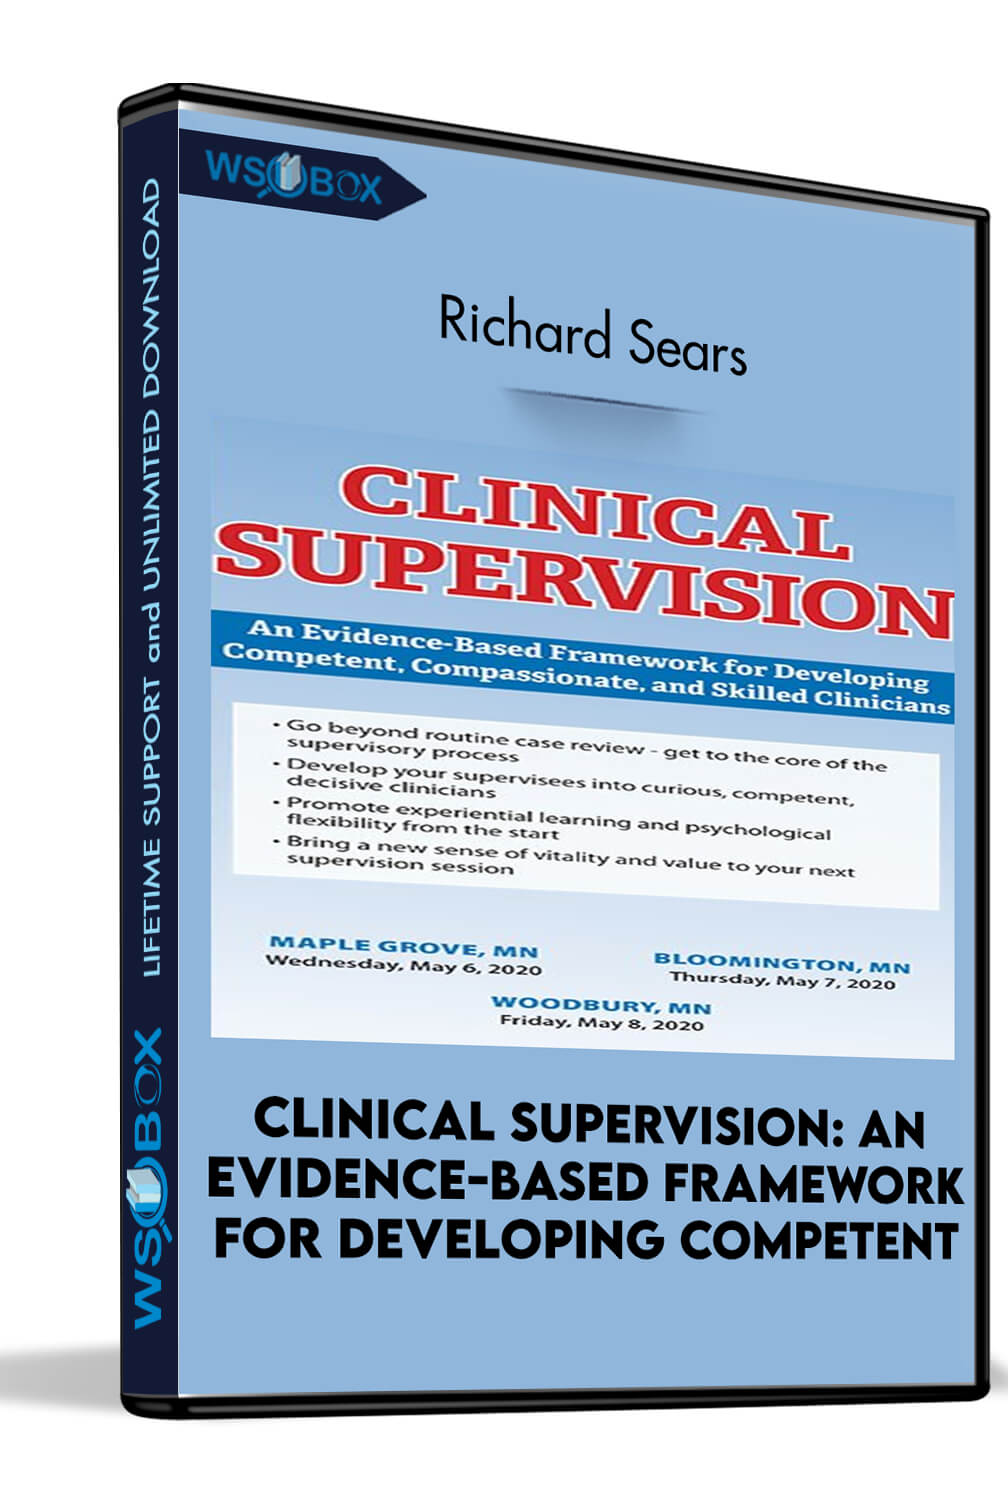 Clinical Supervision: An Evidence-Based Framework for Developing Competent, Compassionate, and Skilled Clinicians – Richard Sears